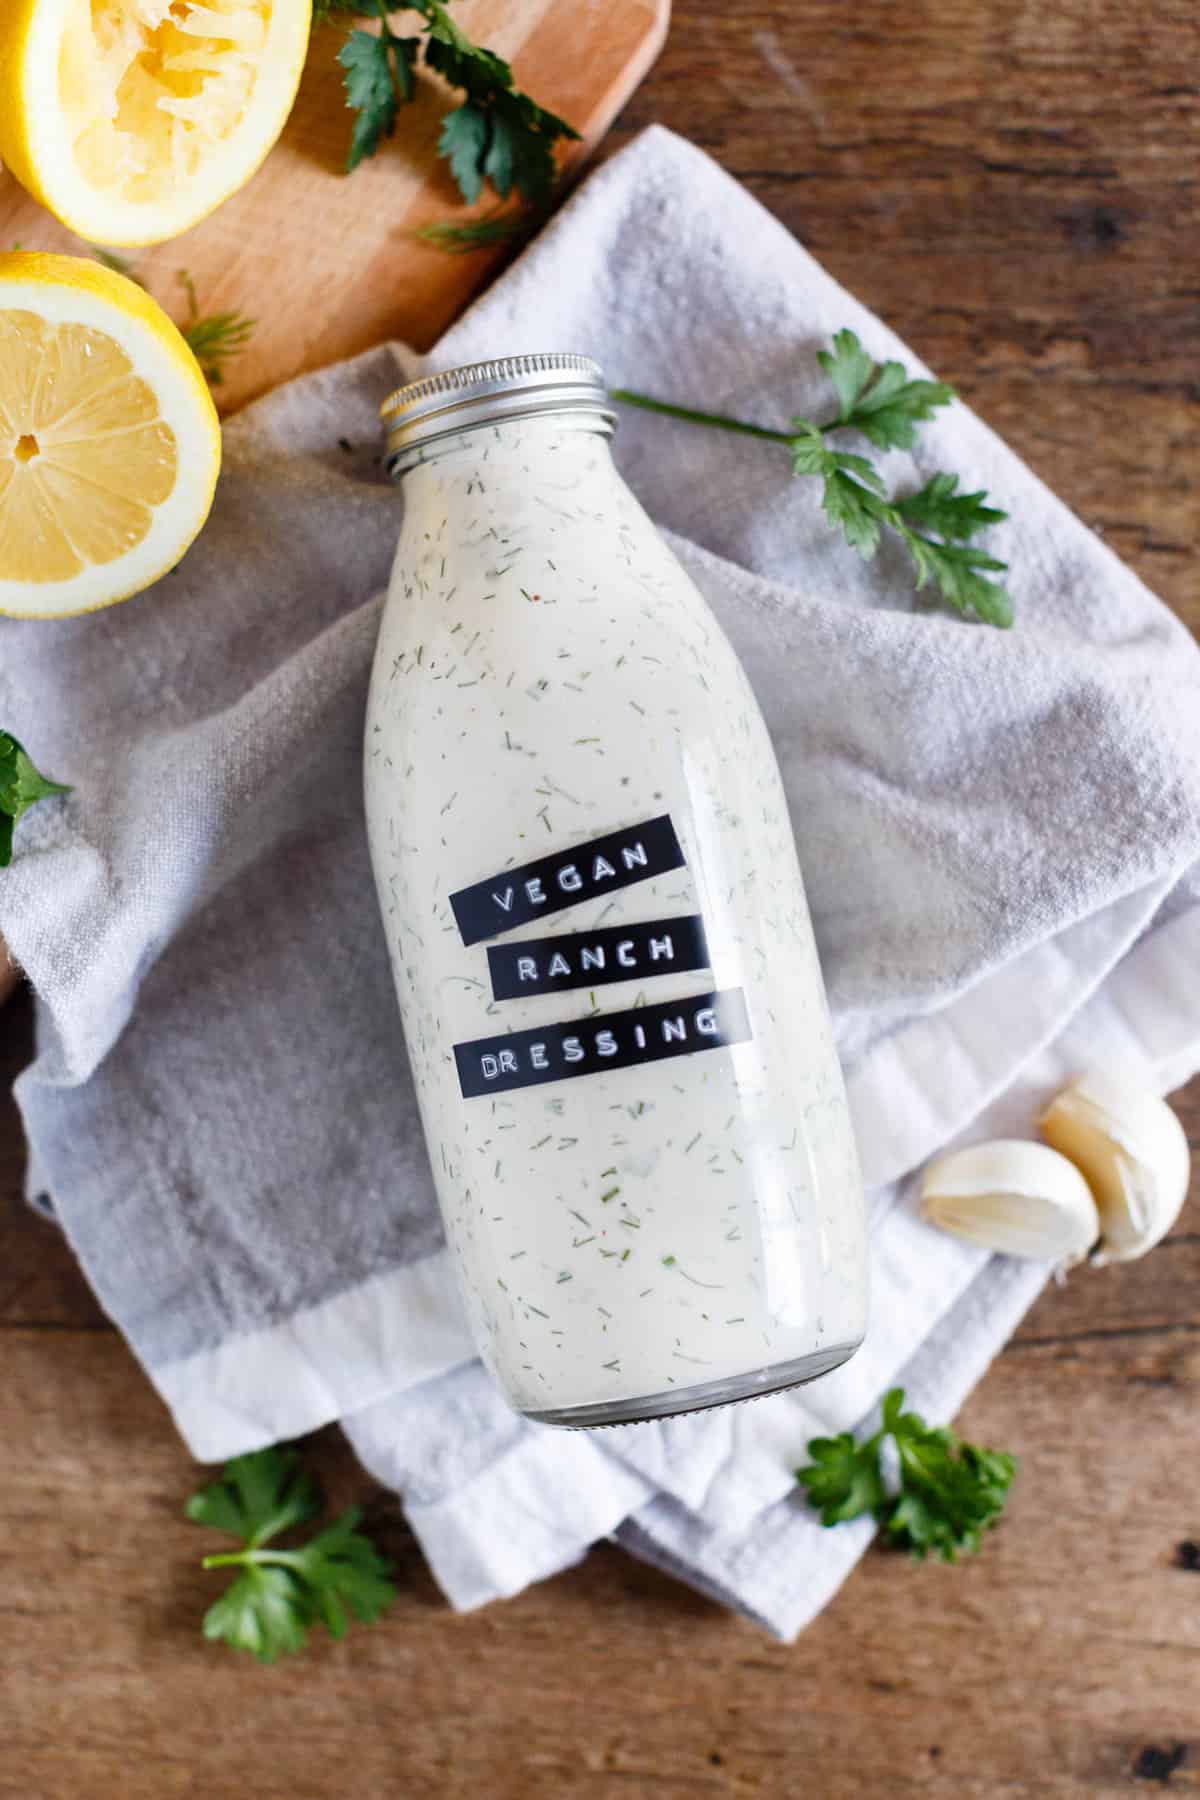 Bottle of homemade vegan ranch dressing laying on a grey kitchen towel.